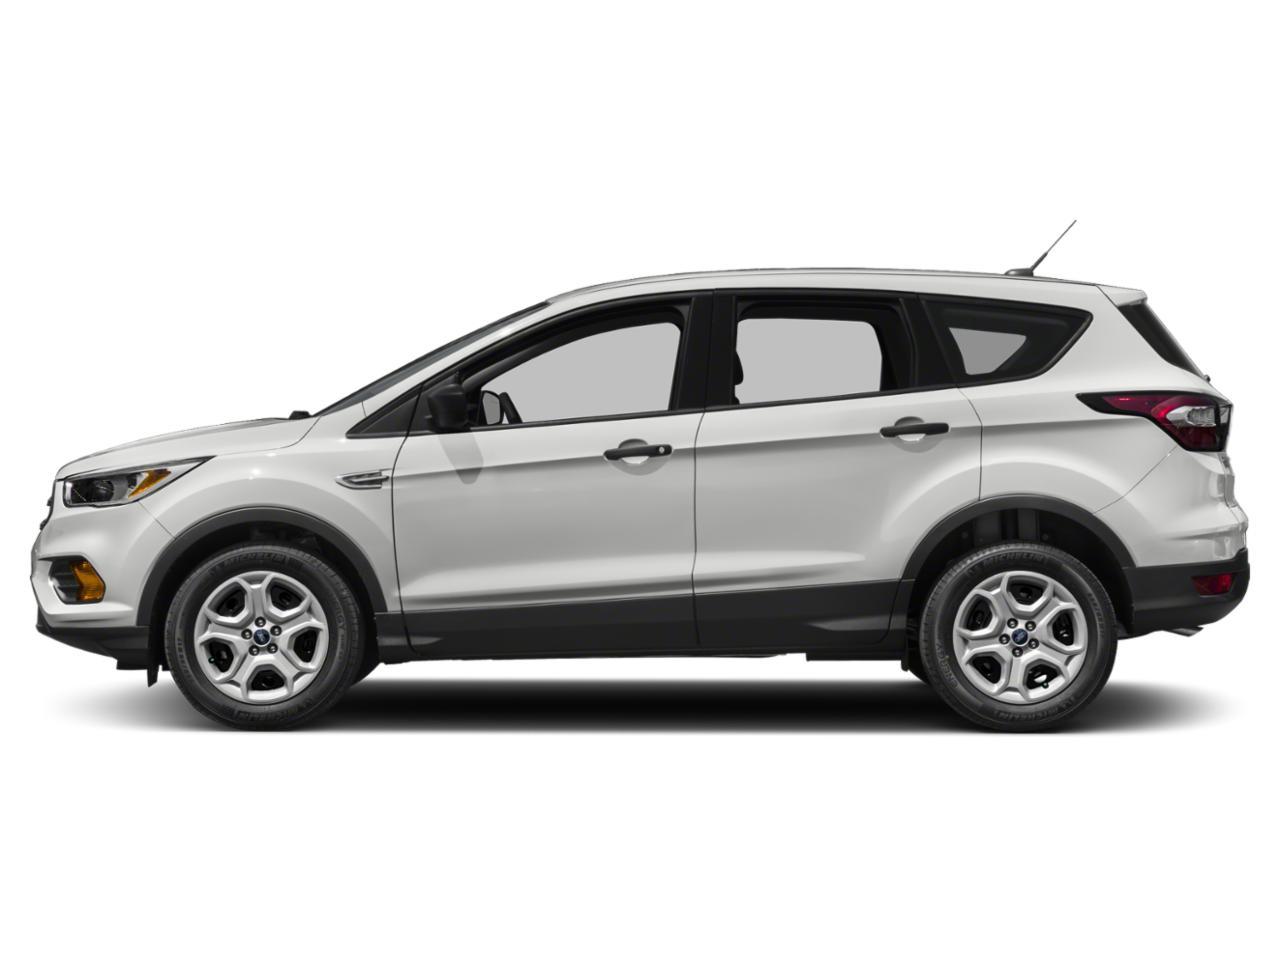 Used 2019 Ford Escape SE with VIN 1FMCU0GD9KUB21014 for sale in Covington, LA